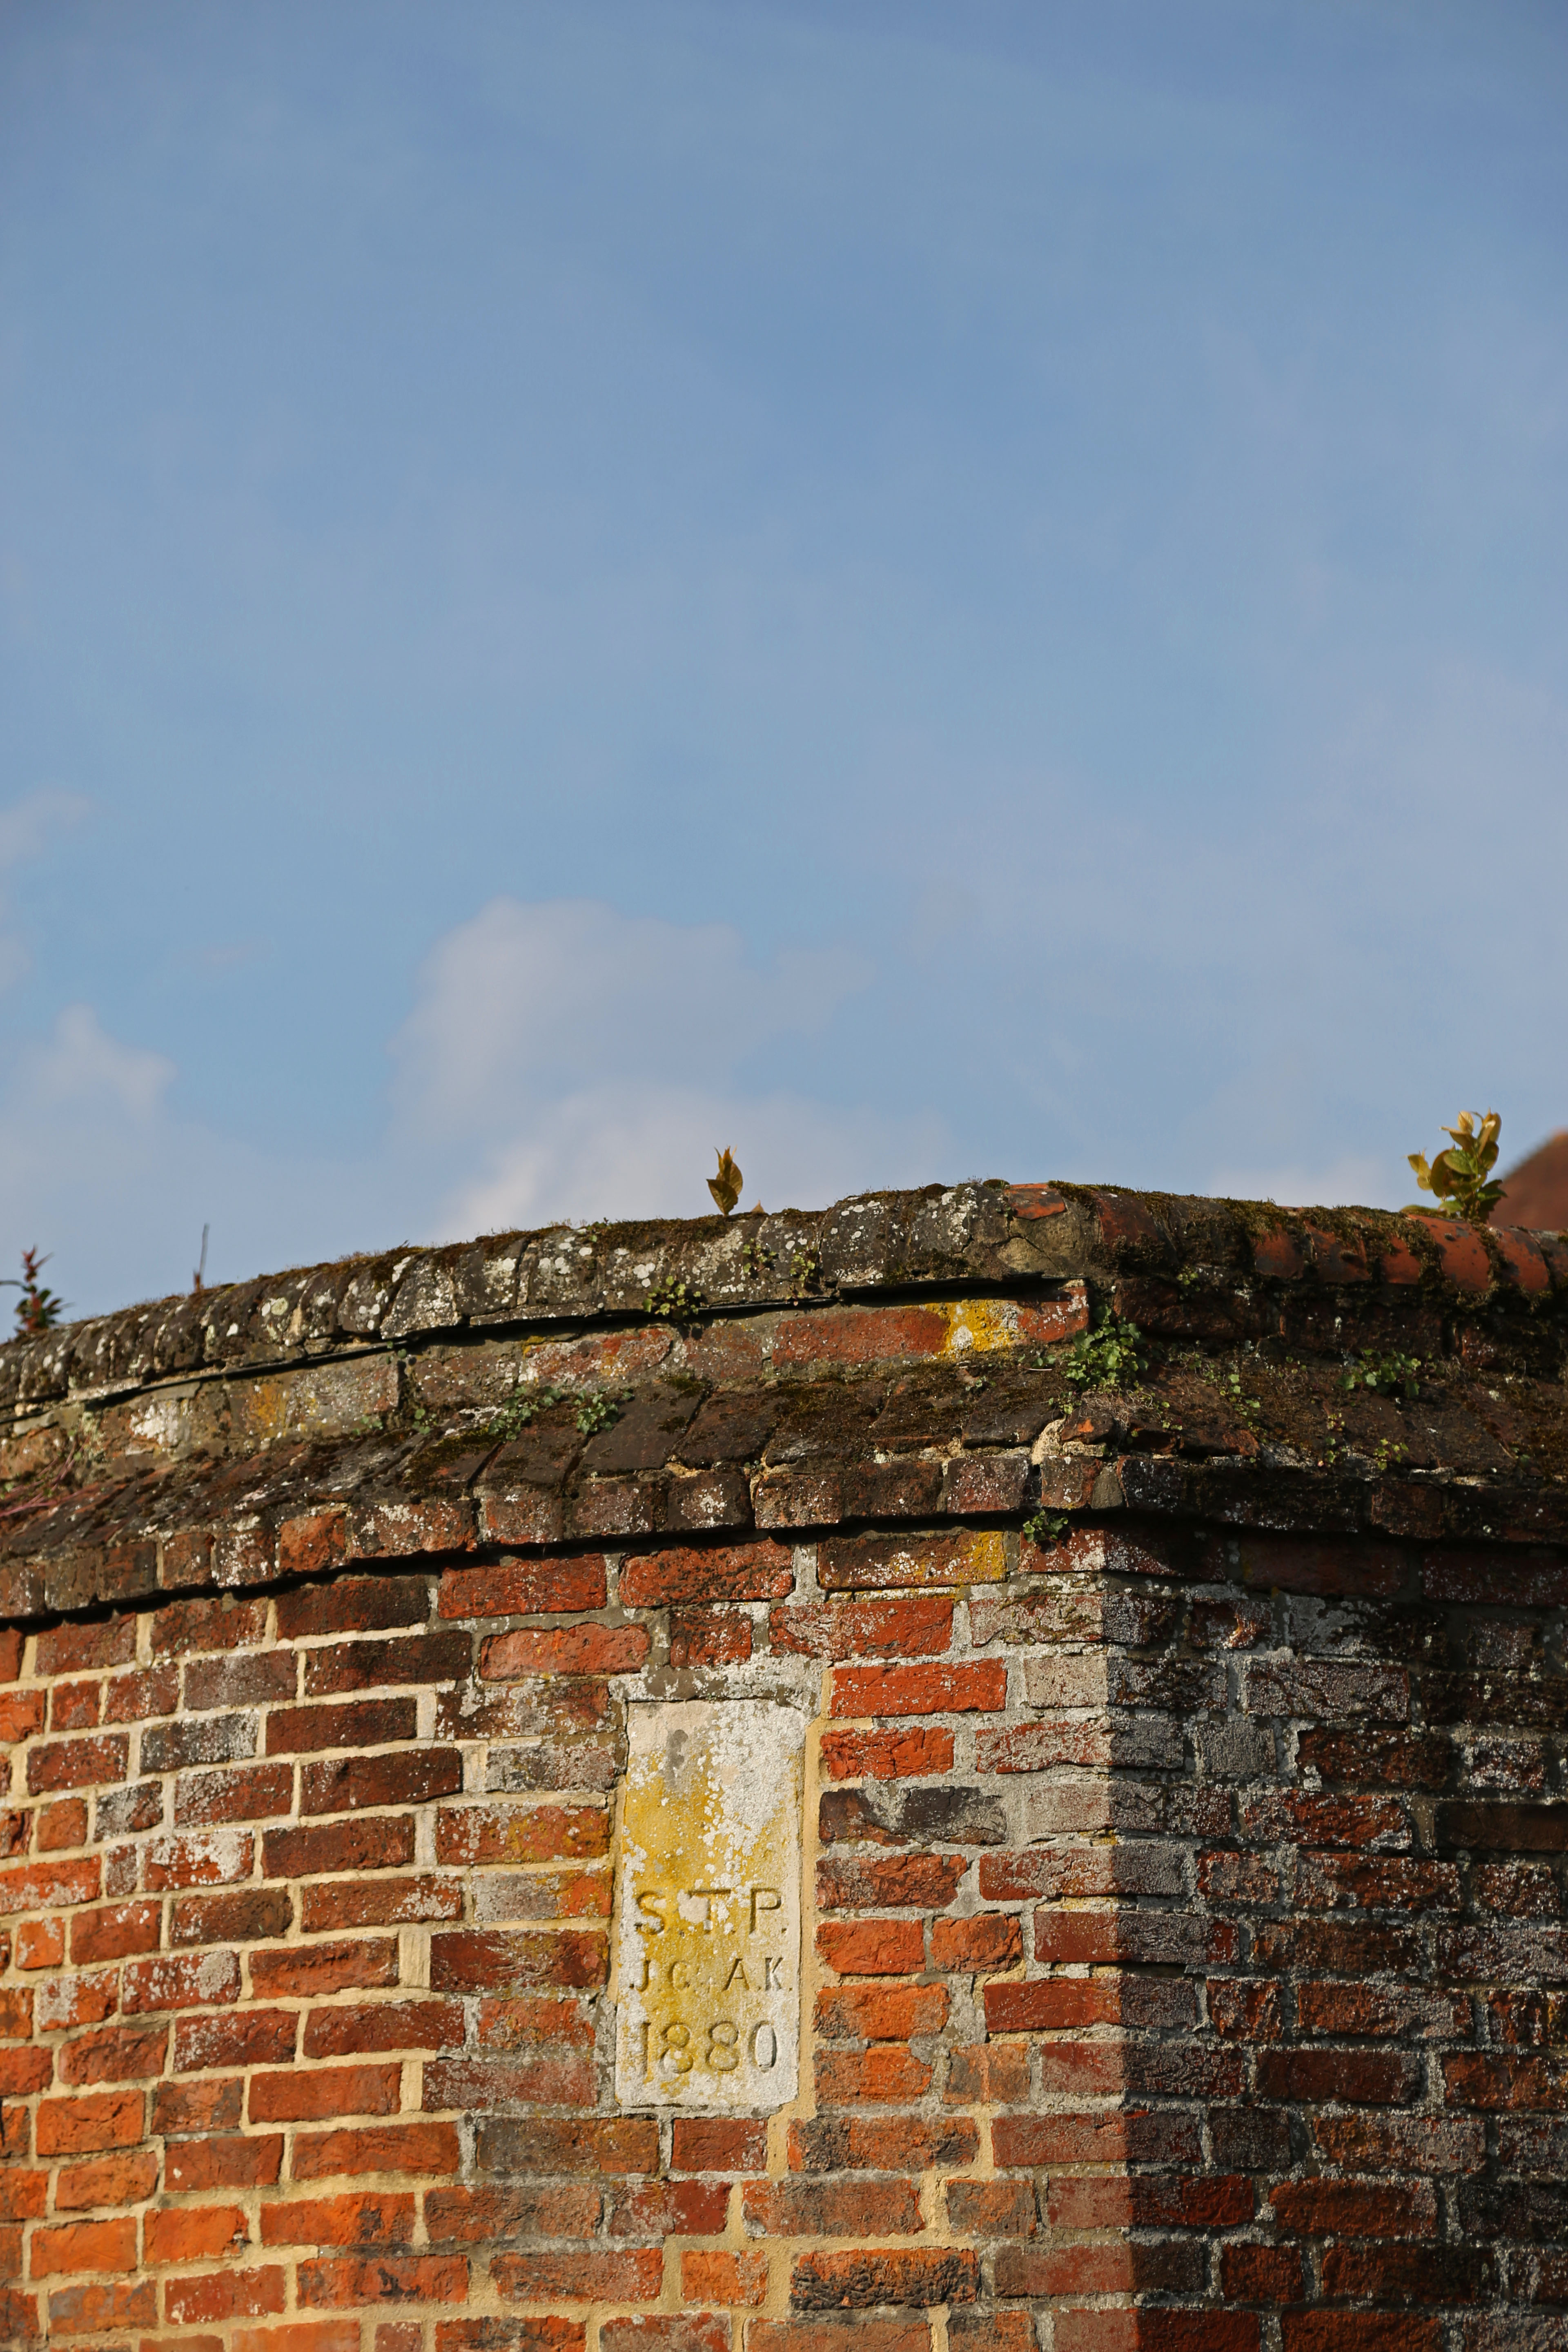 Corner of a wall, with eh year 1880 inscribed, against a blue sky